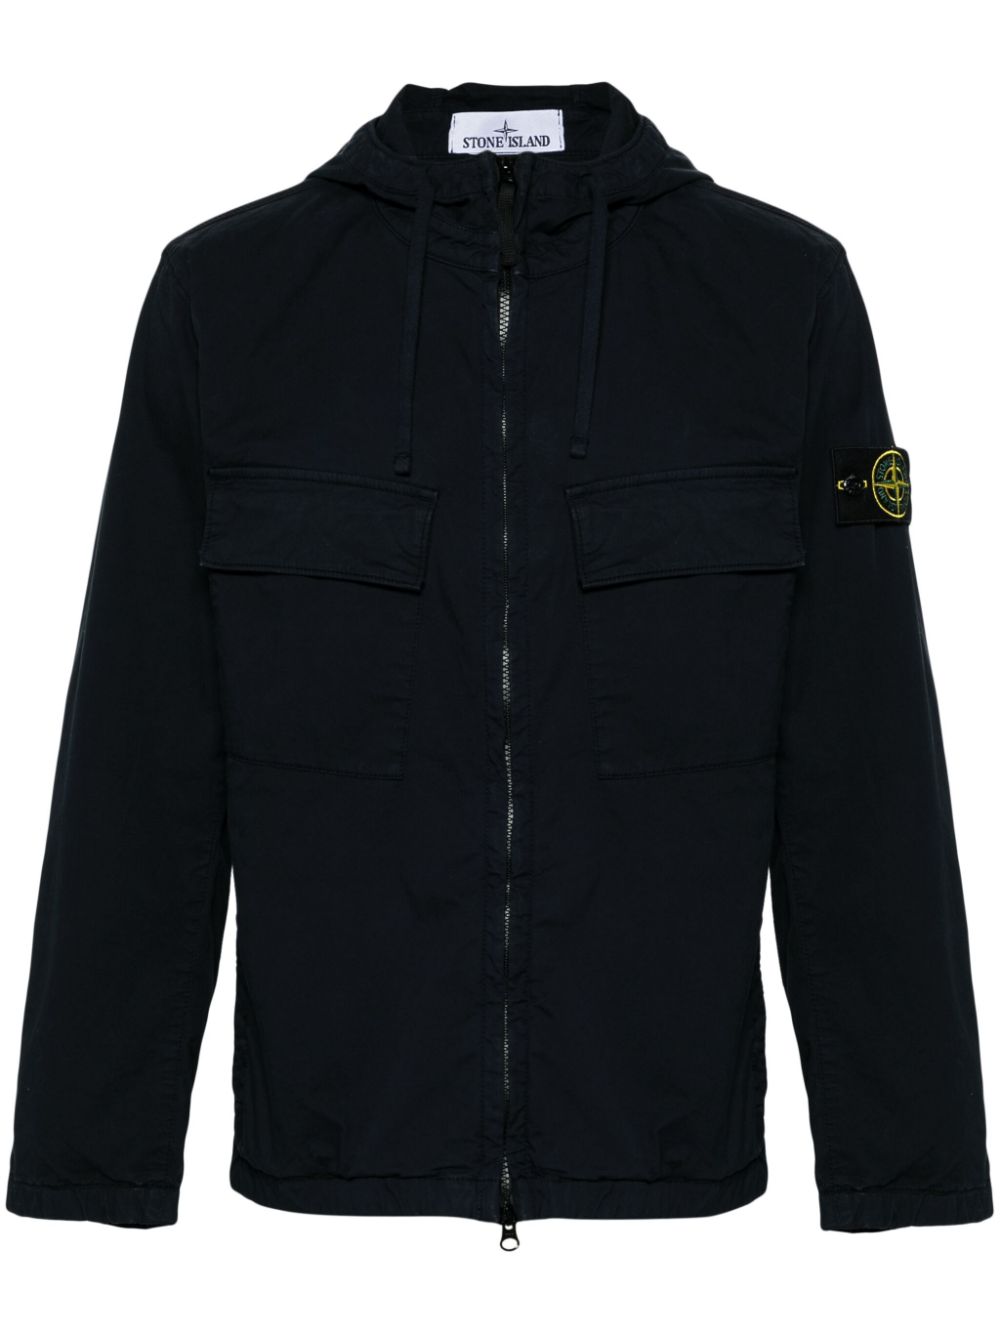 Image 1 of Stone Island Compass-appliqué hooded jacket